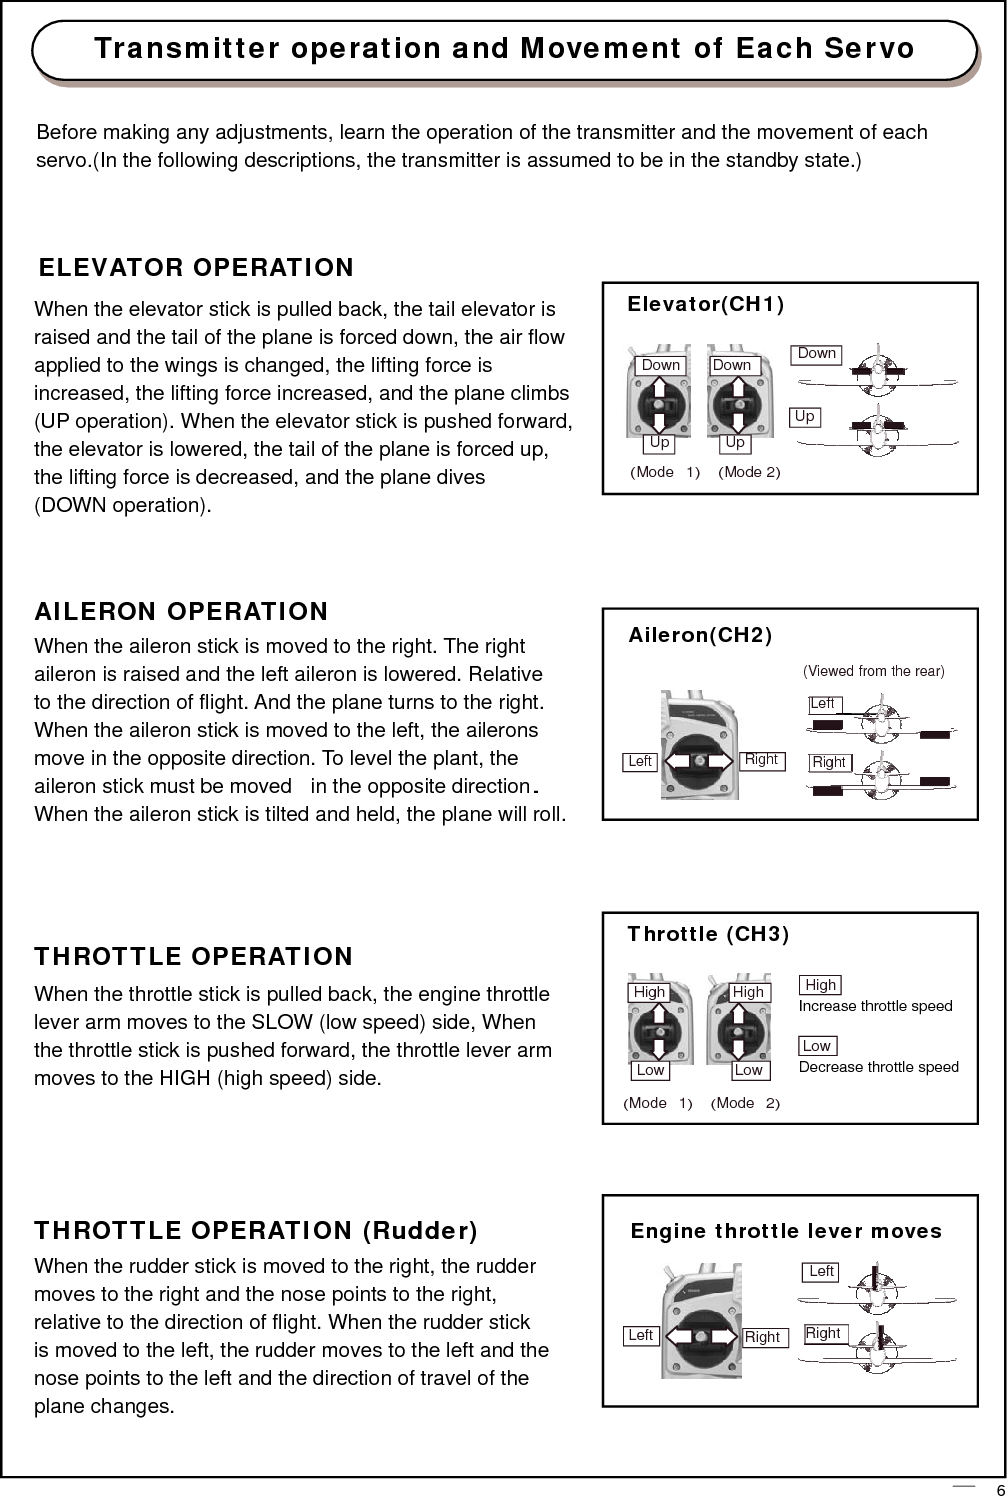  Transmitter operation and Movement of Each Servo    Before making any adjustments, learn the operation of the transmitter and the movement of each servo.(In the following descriptions, the transmitter is assumed to be in the standby state.)     ELEVATOR OPERATION  When the elevator stick is pulled back, the tail elevator is raised and the tail of the plane is forced down, the air flow applied to the wings is changed, the lifting force is increased, the lifting force increased, and the plane climbs (UP operation). When the elevator stick is pushed forward, the elevator is lowered, the tail of the plane is forced up, the lifting force is decreased, and the plane dives (DOWN operation).   Elevator(CH1)   Down Down    Up Up  (Mode  1)  (Mode 2)     Down   Up     AILERON OPERATION When the aileron stick is moved to the right. The right aileron is raised and the left aileron is lowered. Relative to the direction of flight. And the plane turns to the right. When the aileron stick is moved to the left, the ailerons move in the opposite direction. To level the plant, the aileron stick must be moved   in the opposite direction. When the aileron stick is tilted and held, the plane will roll.  Aileron(CH2)      Left Right    (Viewed from the rear)  Left   Right       THROTTLE OPERATION When the throttle stick is pulled back, the engine throttle lever arm moves to the SLOW (low speed) side, When the throttle stick is pushed forward, the throttle lever arm moves to the HIGH (high speed) side. Throttle (CH3)   High High    Low Low  (Mode  1) (Mode  2)   High Increase throttle speed  Low Decrease throttle speed      THROTTLE OPERATION (Rudder) When the rudder stick is moved to the right, the rudder moves to the right and the nose points to the right, relative to the direction of flight. When the rudder stick is moved to the left, the rudder moves to the left and the nose points to the left and the direction of travel of the plane changes. Engine throttle lever moves  Left   Left Right Right           6 